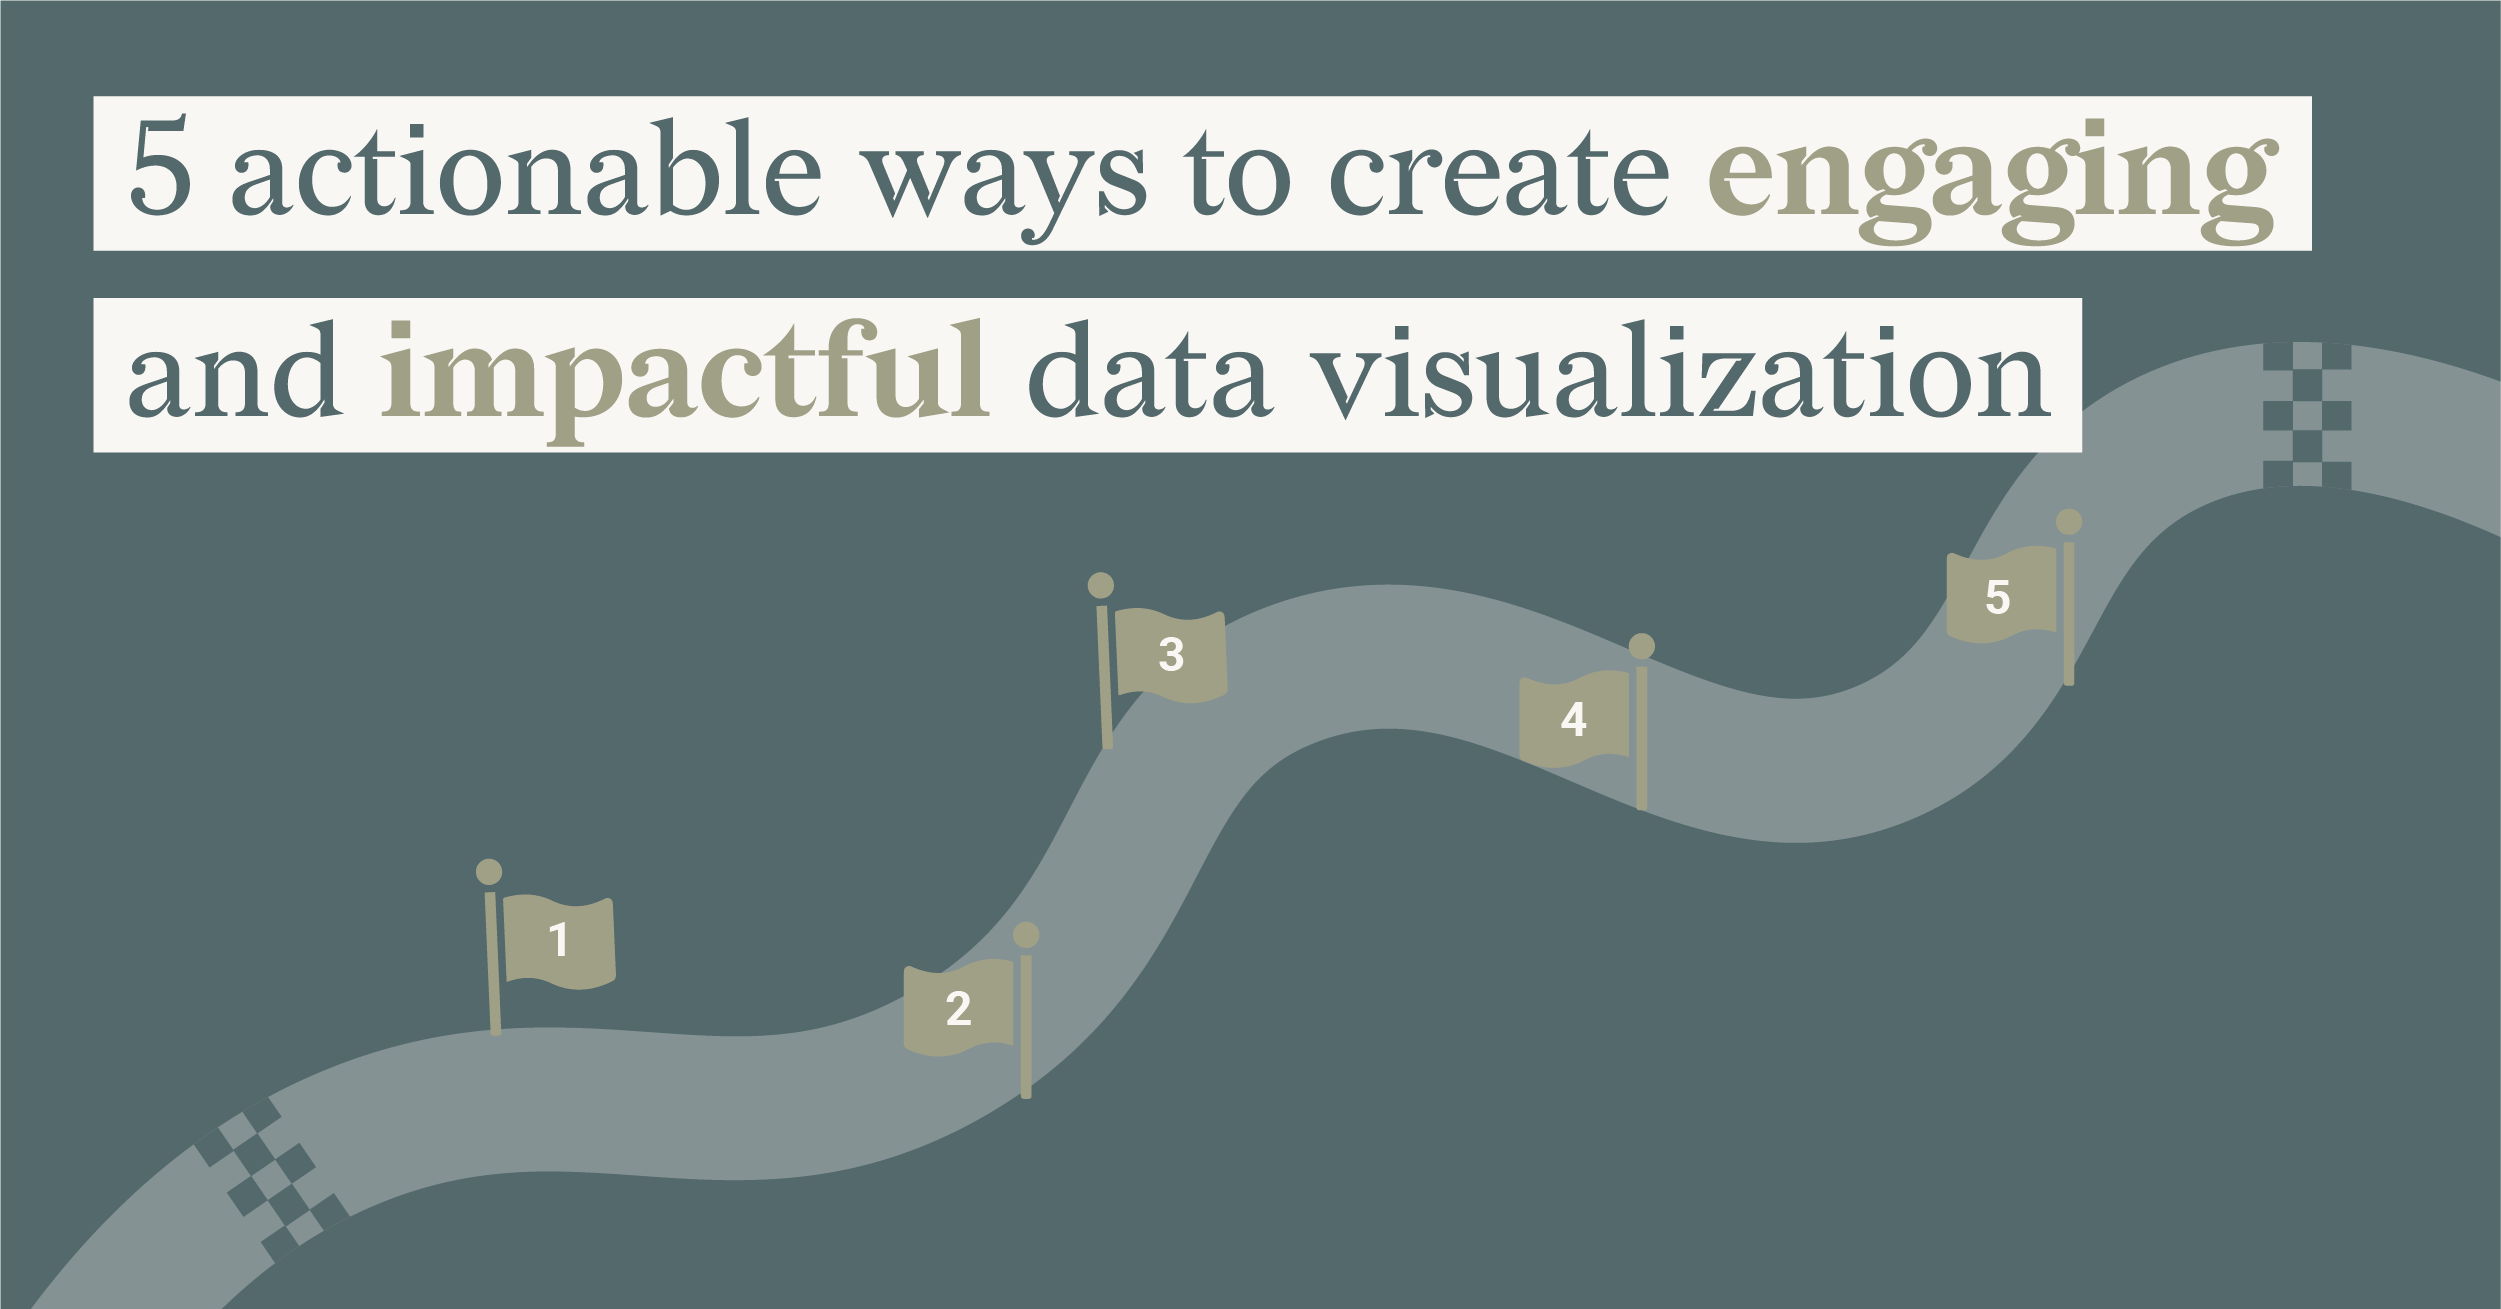 Data visualization helps enable an organization to effectively communicate with its audience. Find out how you can leverage dataviz in your data stories!